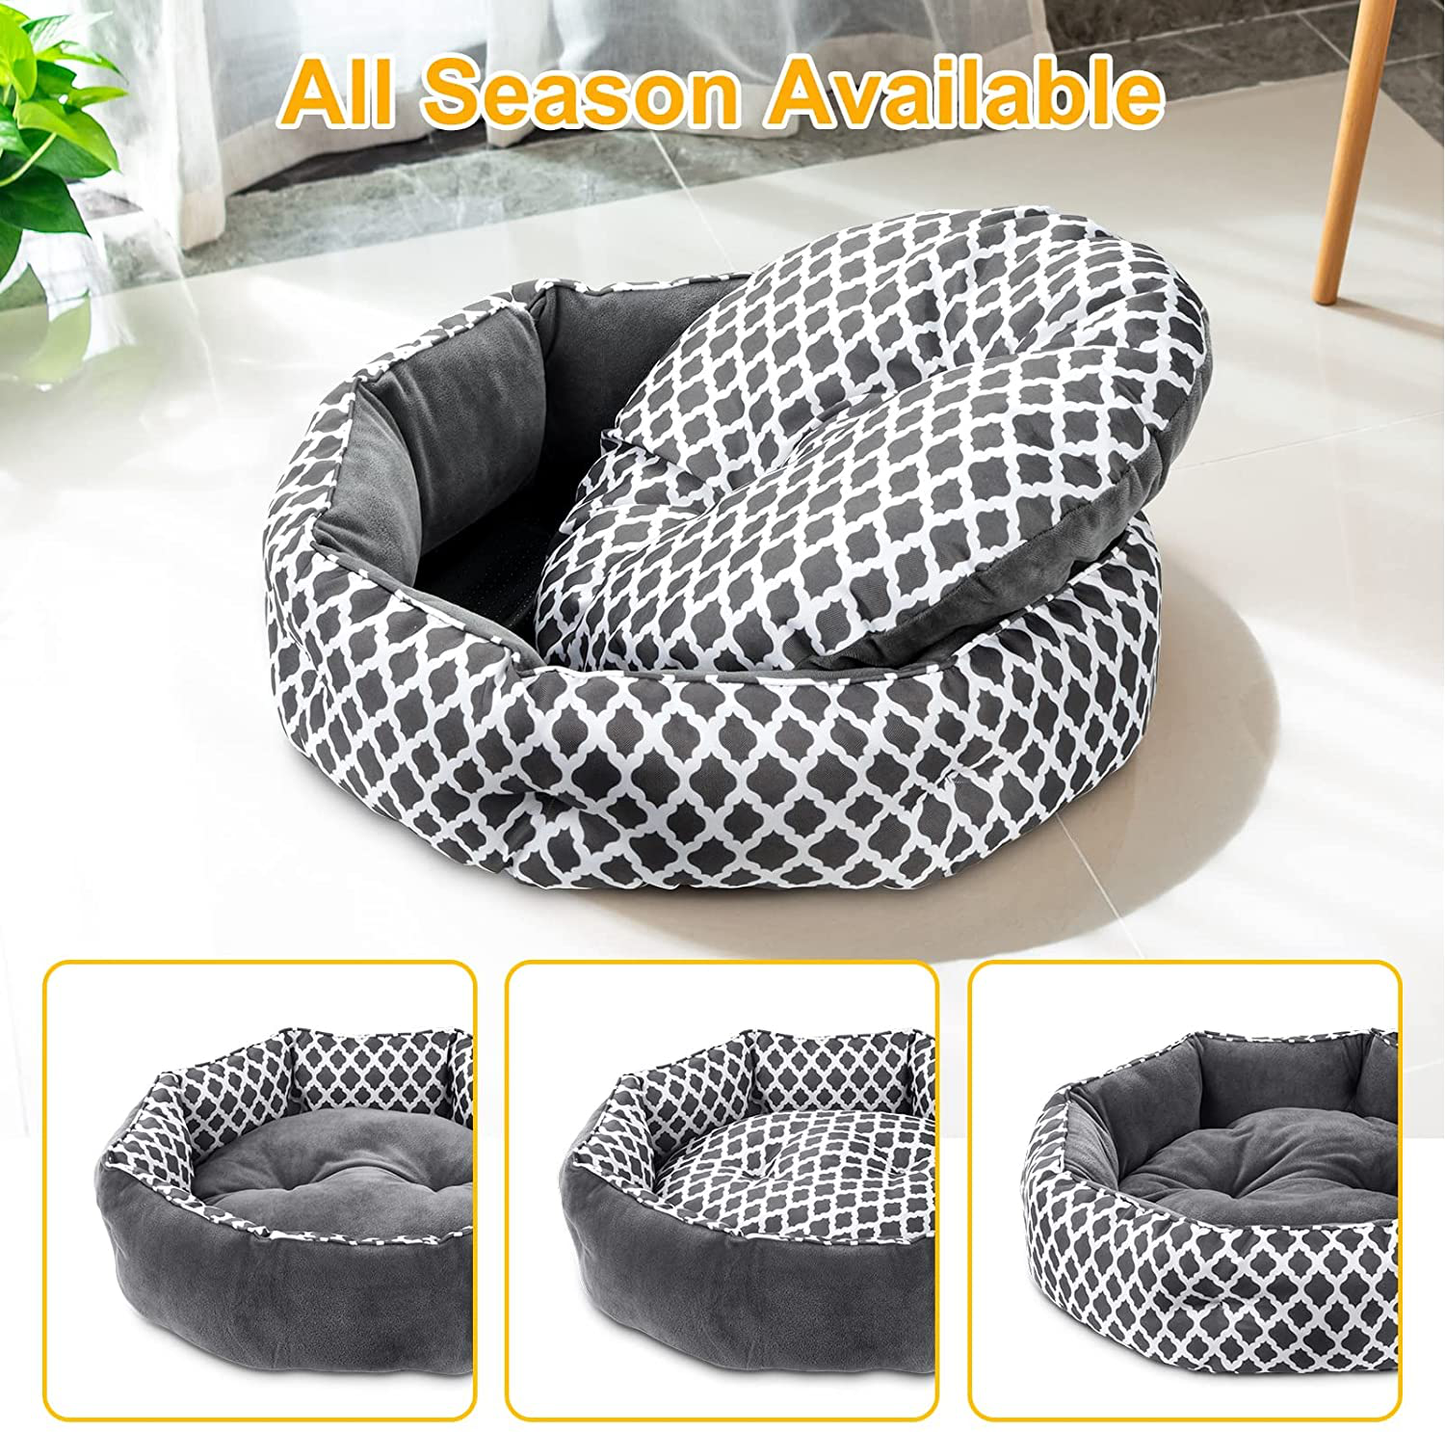 JOYO Cat Bed for Indoor Cat, 20 Inch Cat Bed Machine Washable with Waterproof Non-Slip Bottom, Double-Sided Kitten Plush Cushion Bed for Small Dogs, Soft Flannel round Warming Sofa Bed for Kitty Puppy